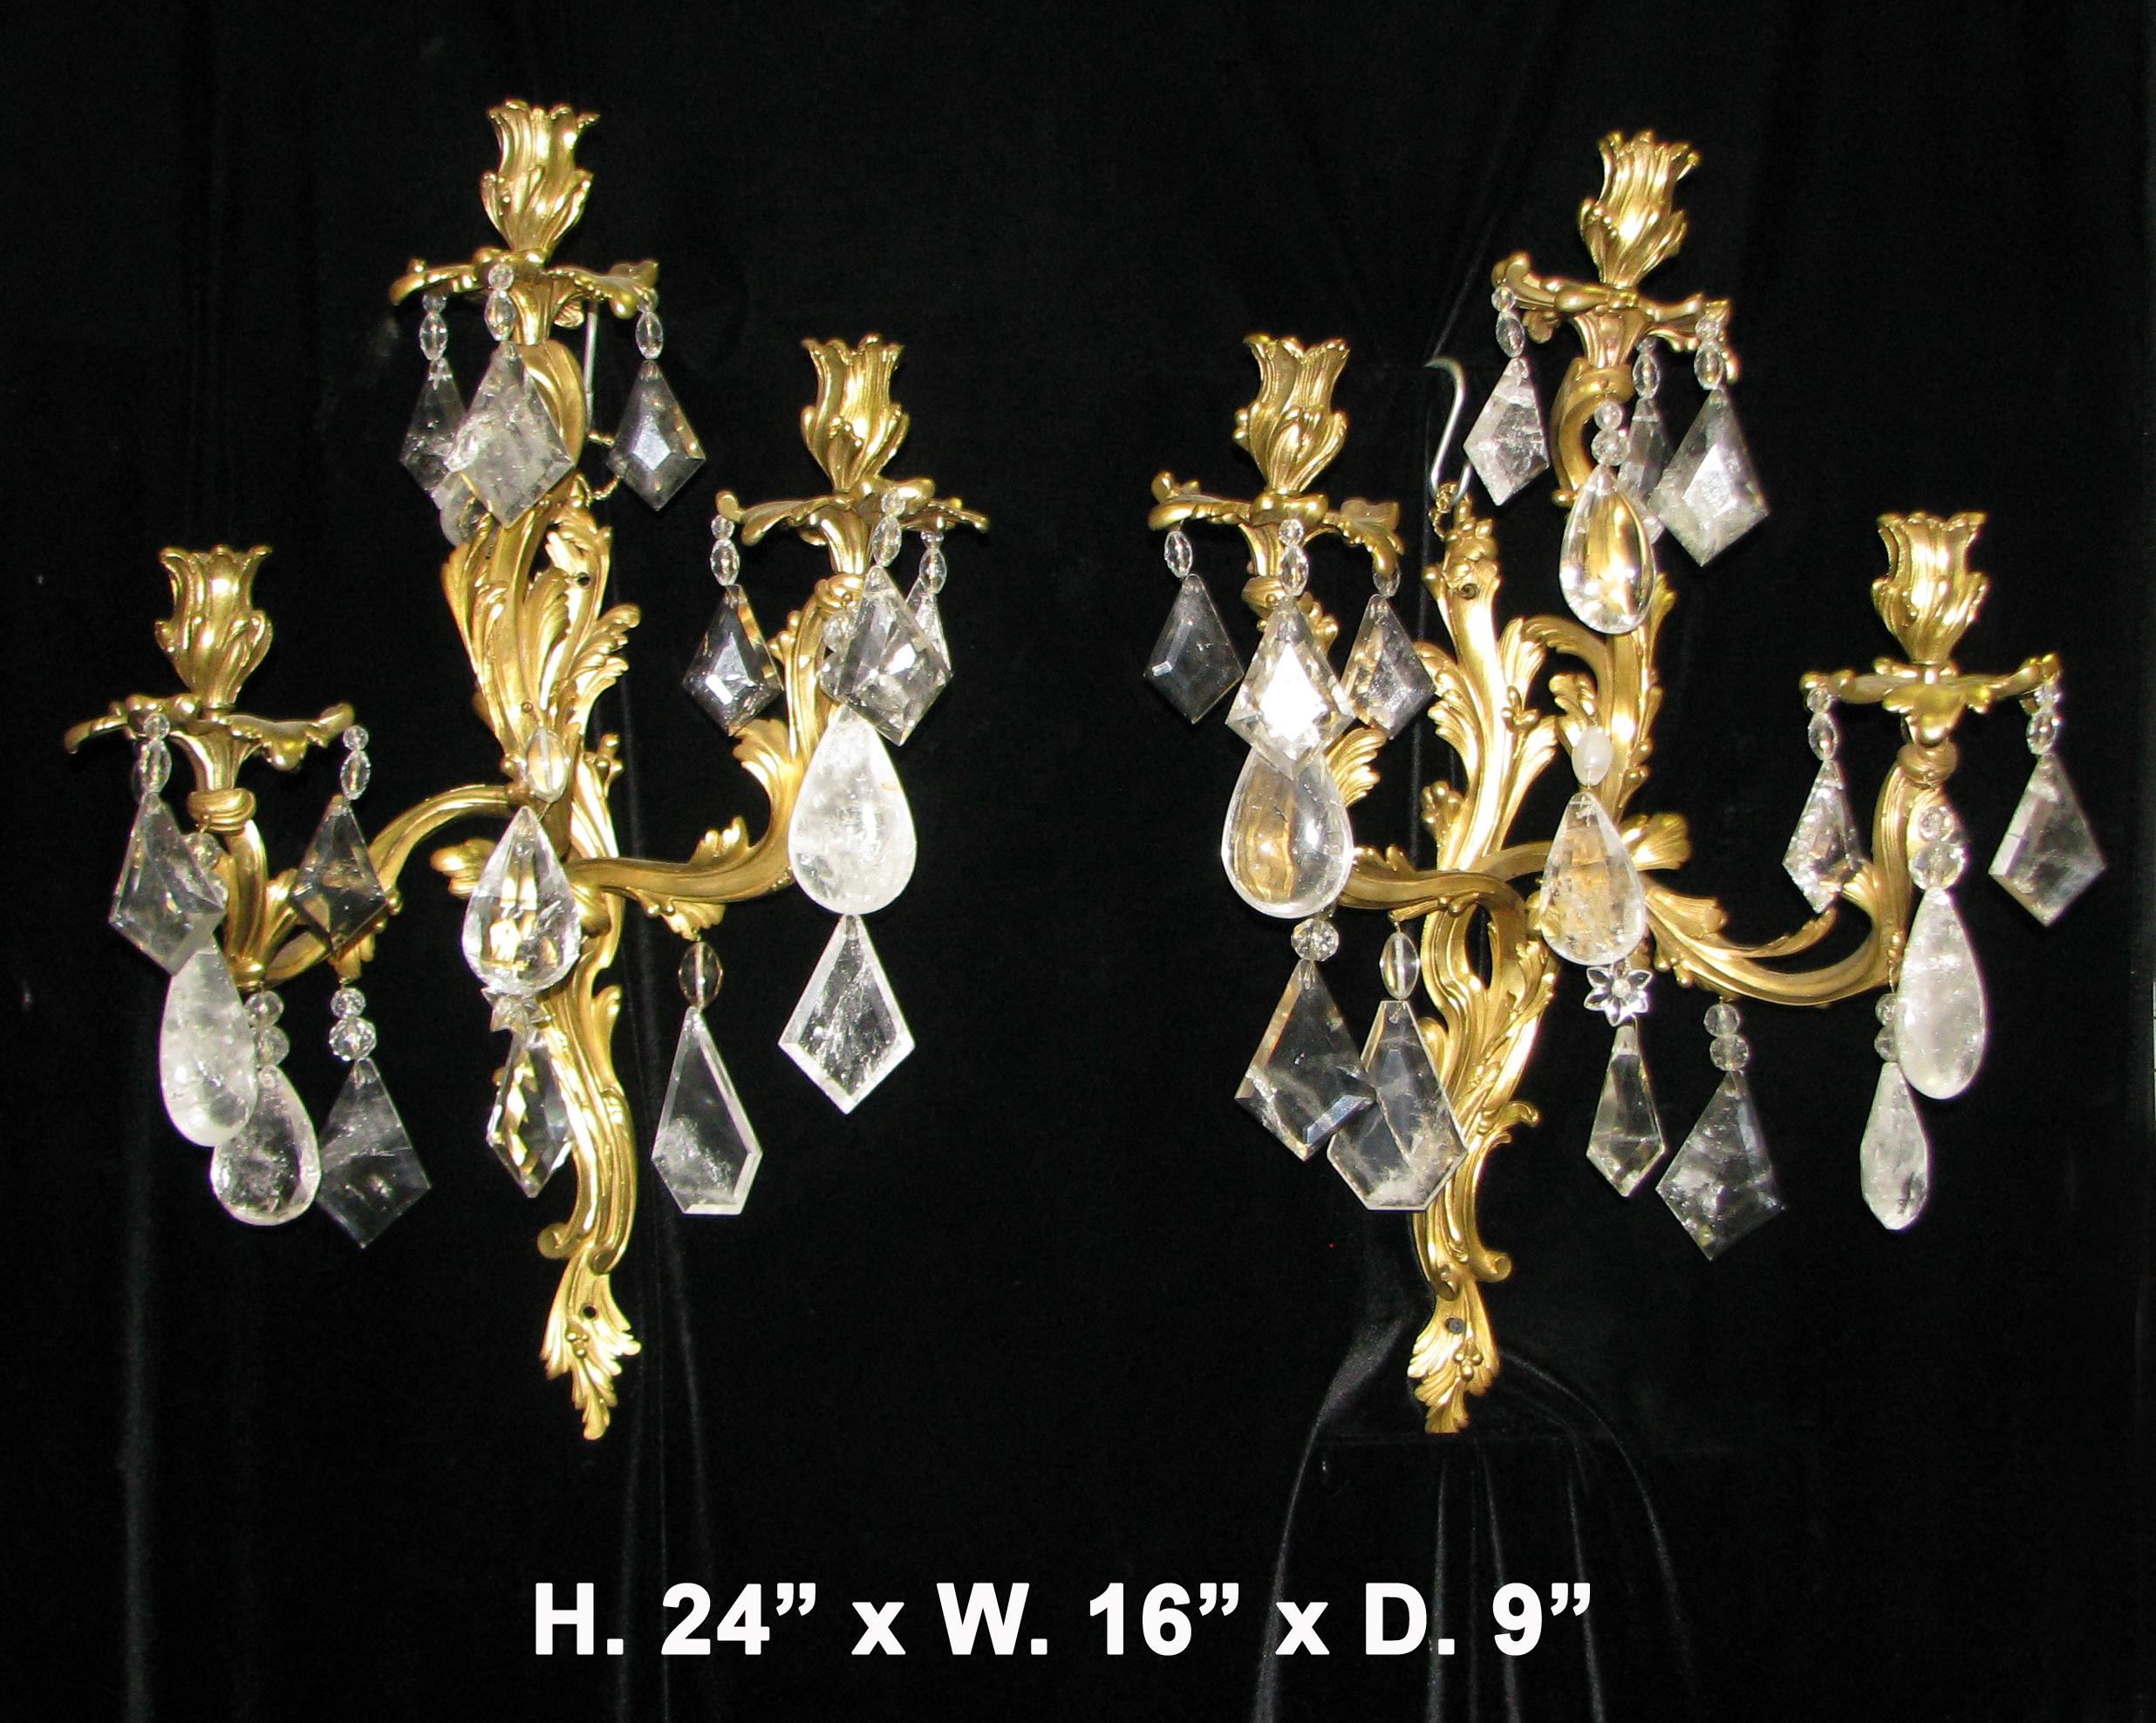 Fine opposing pair of 19th century French Louis XV style ormolu and rock crystal three-light sconces with acanthus motif throughout.
Meticulous attention has been given to every detail.
Measures: H. 24